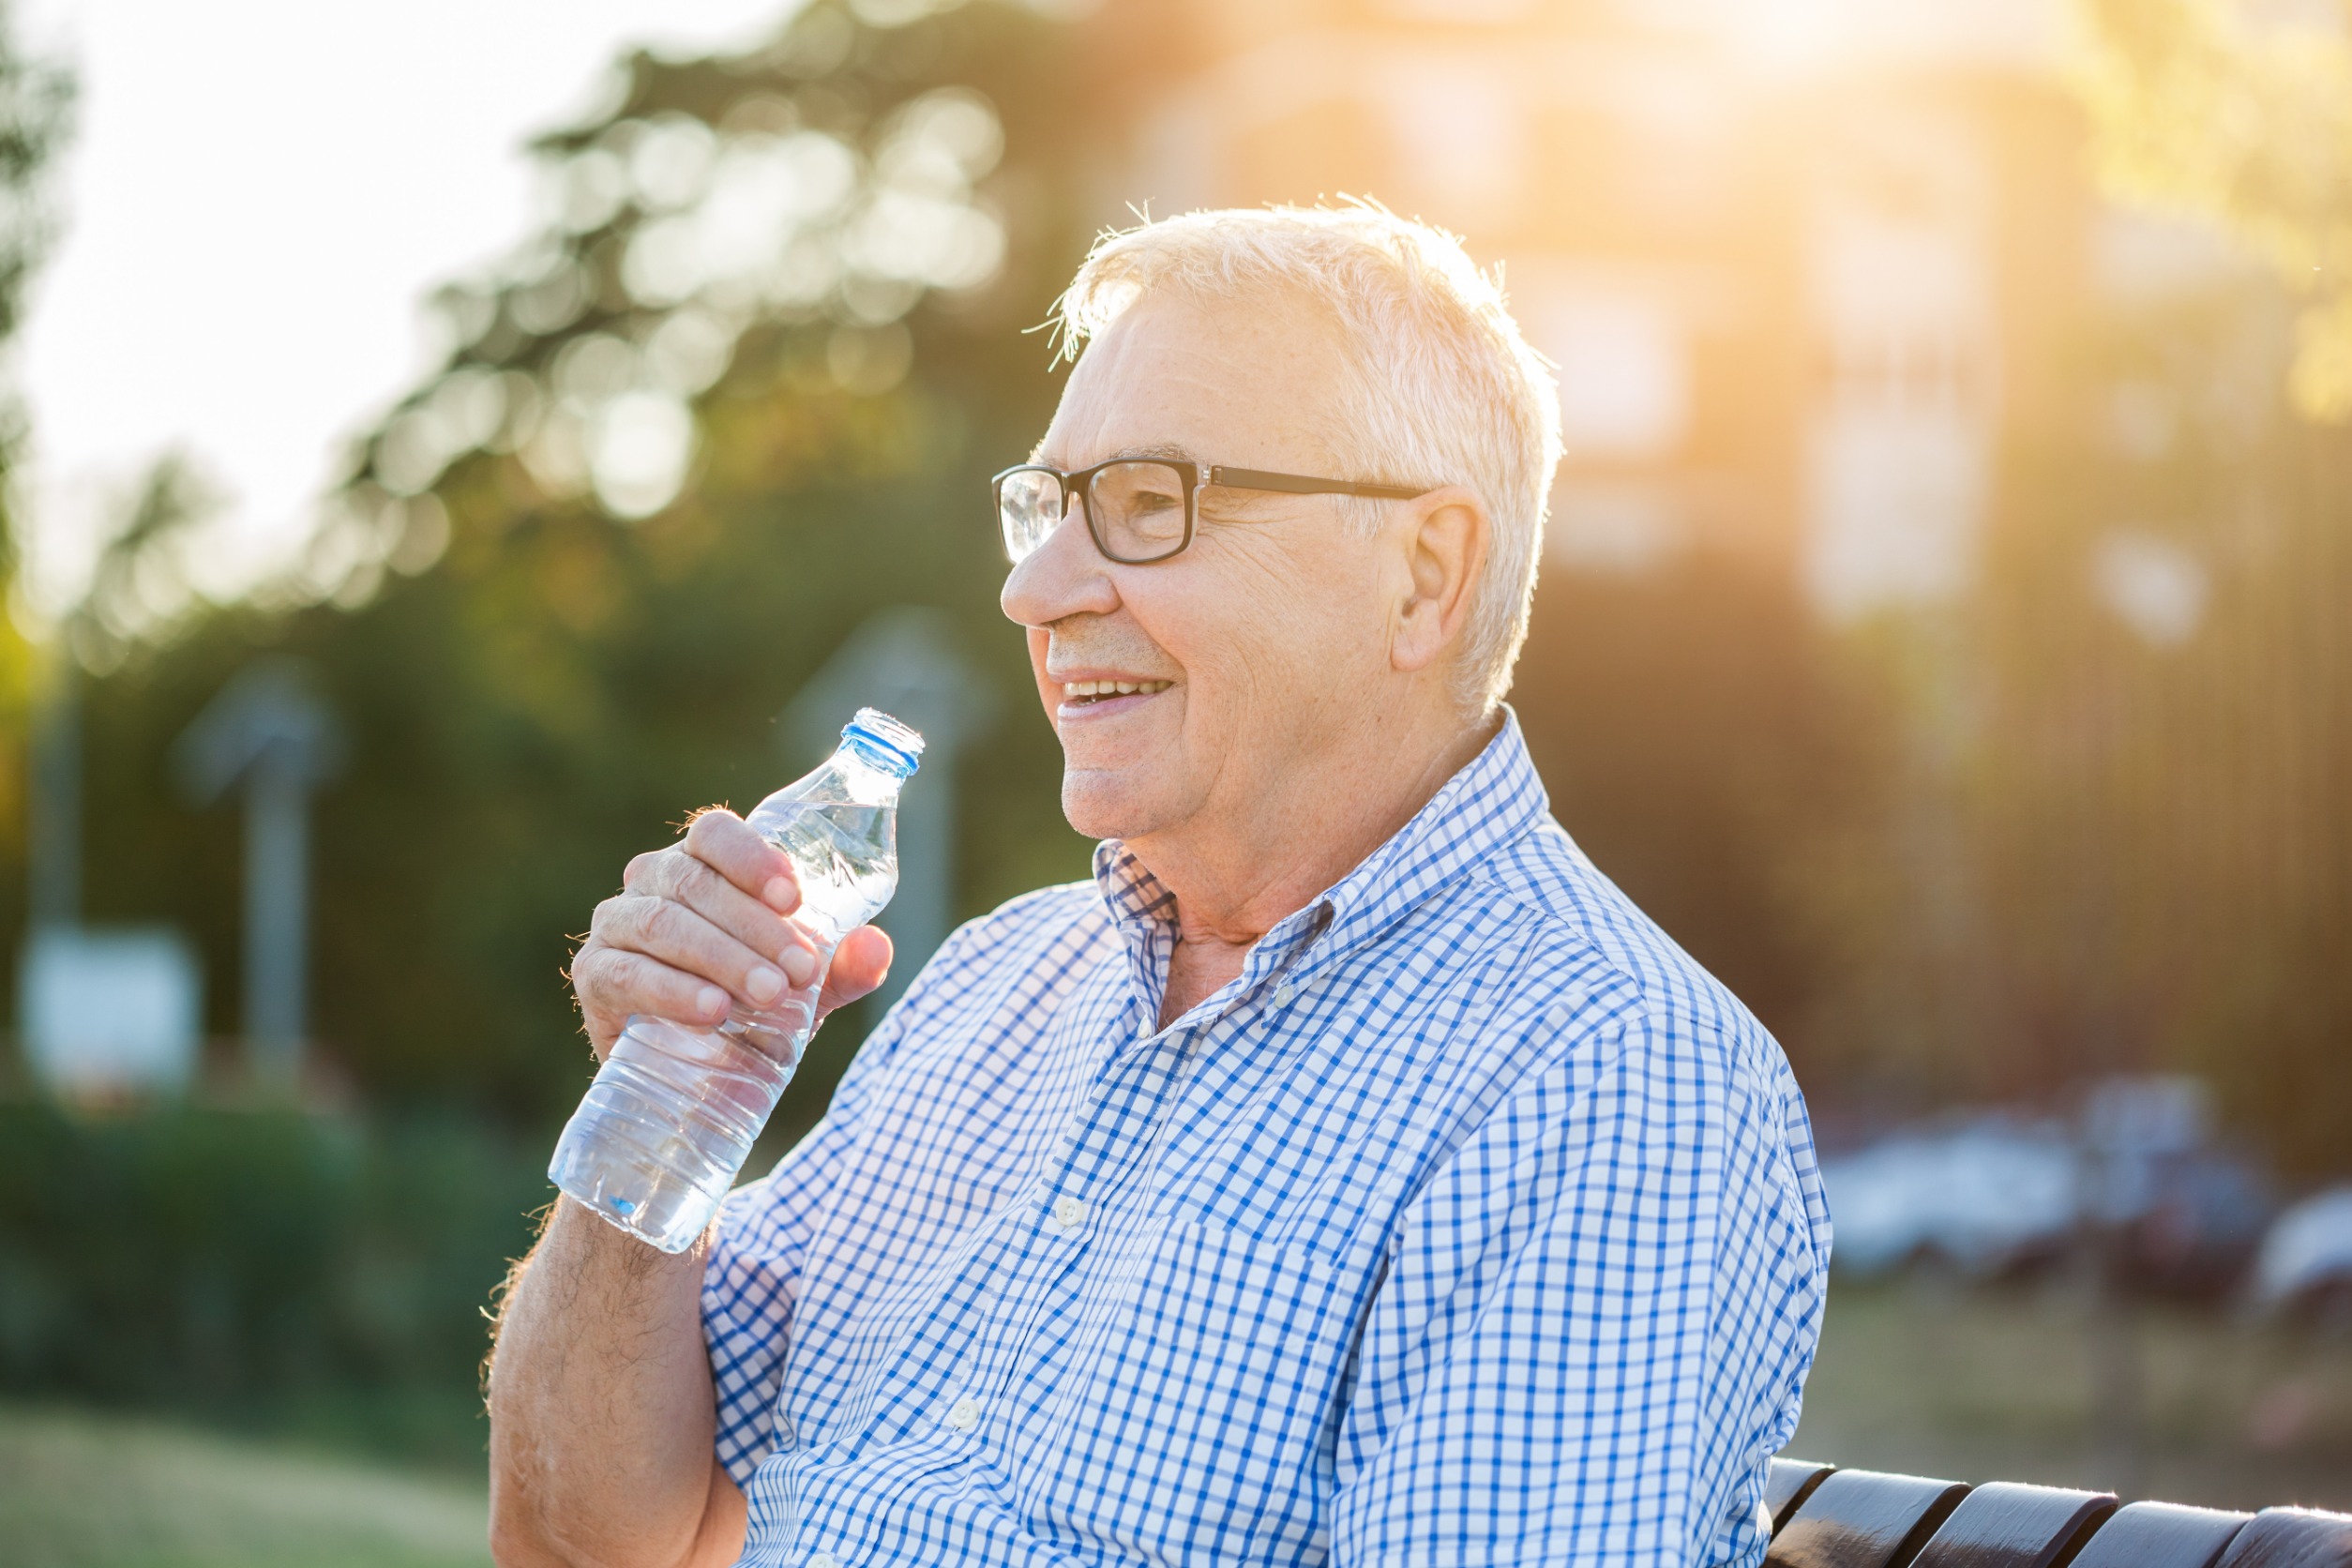 Beating the Heat: How Seniors Can Stay Cool and Comfortable in Summer